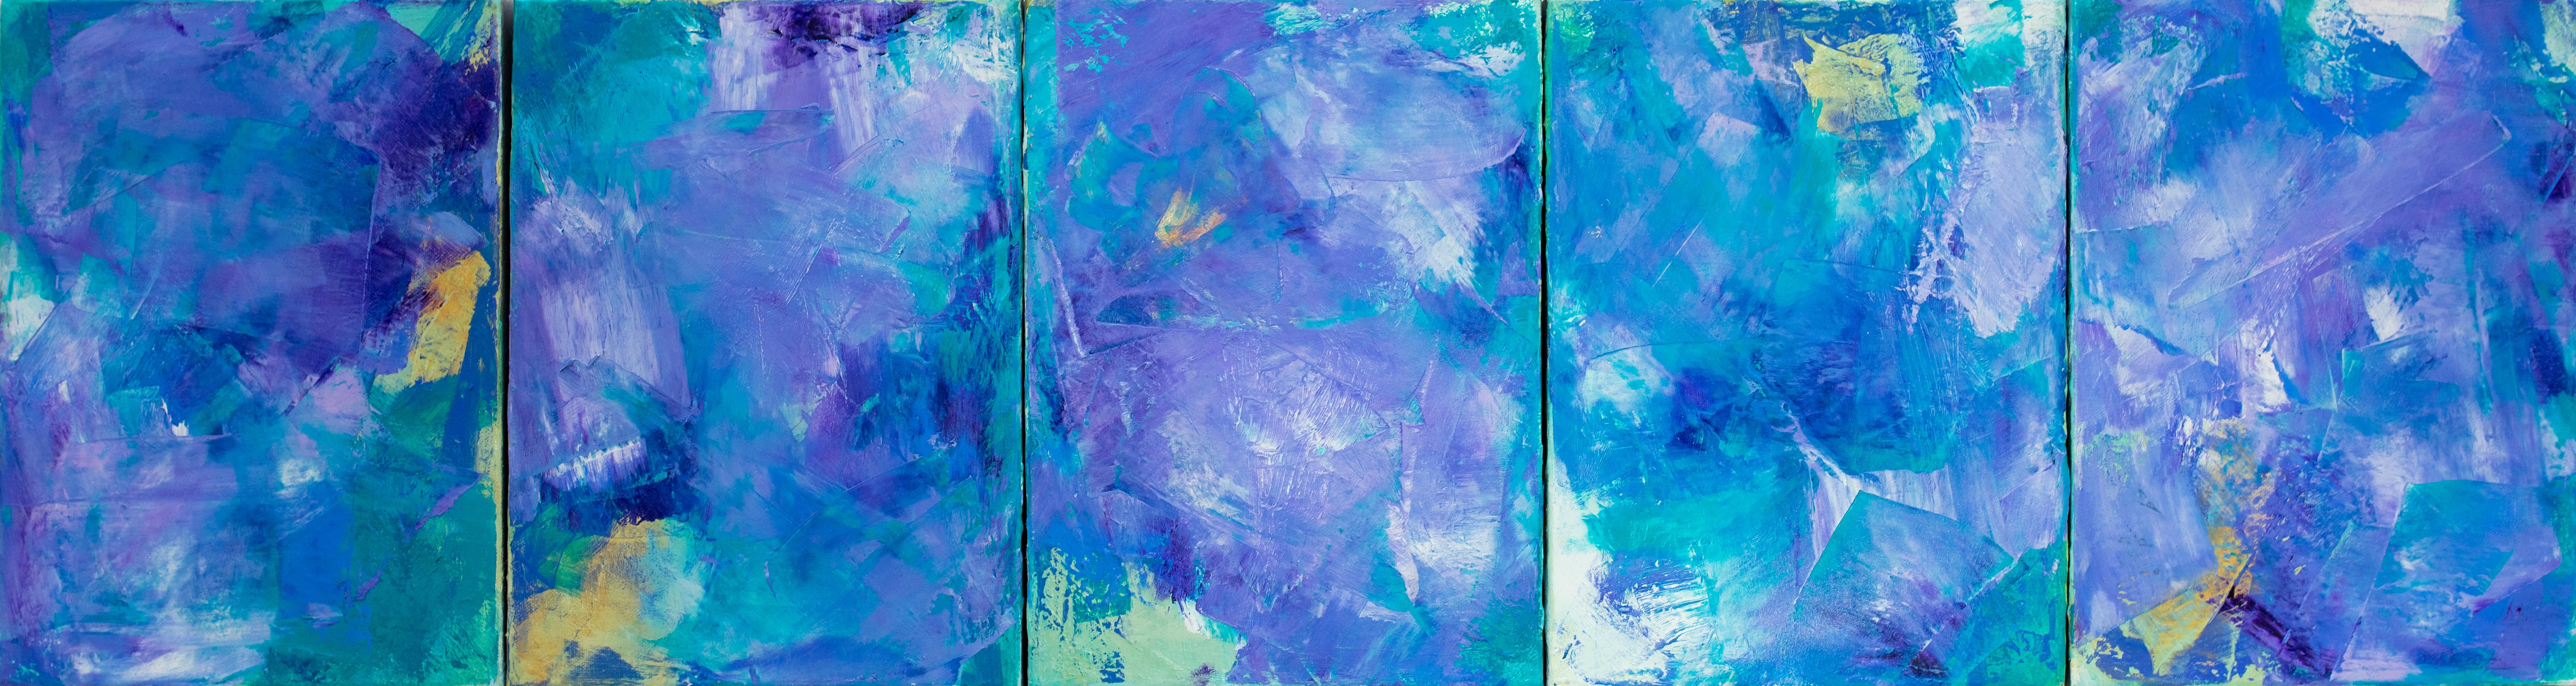 Teodora Guererra Abstract Painting - "Lavender 1 - 5, " contemporary abstract oil painting mini series